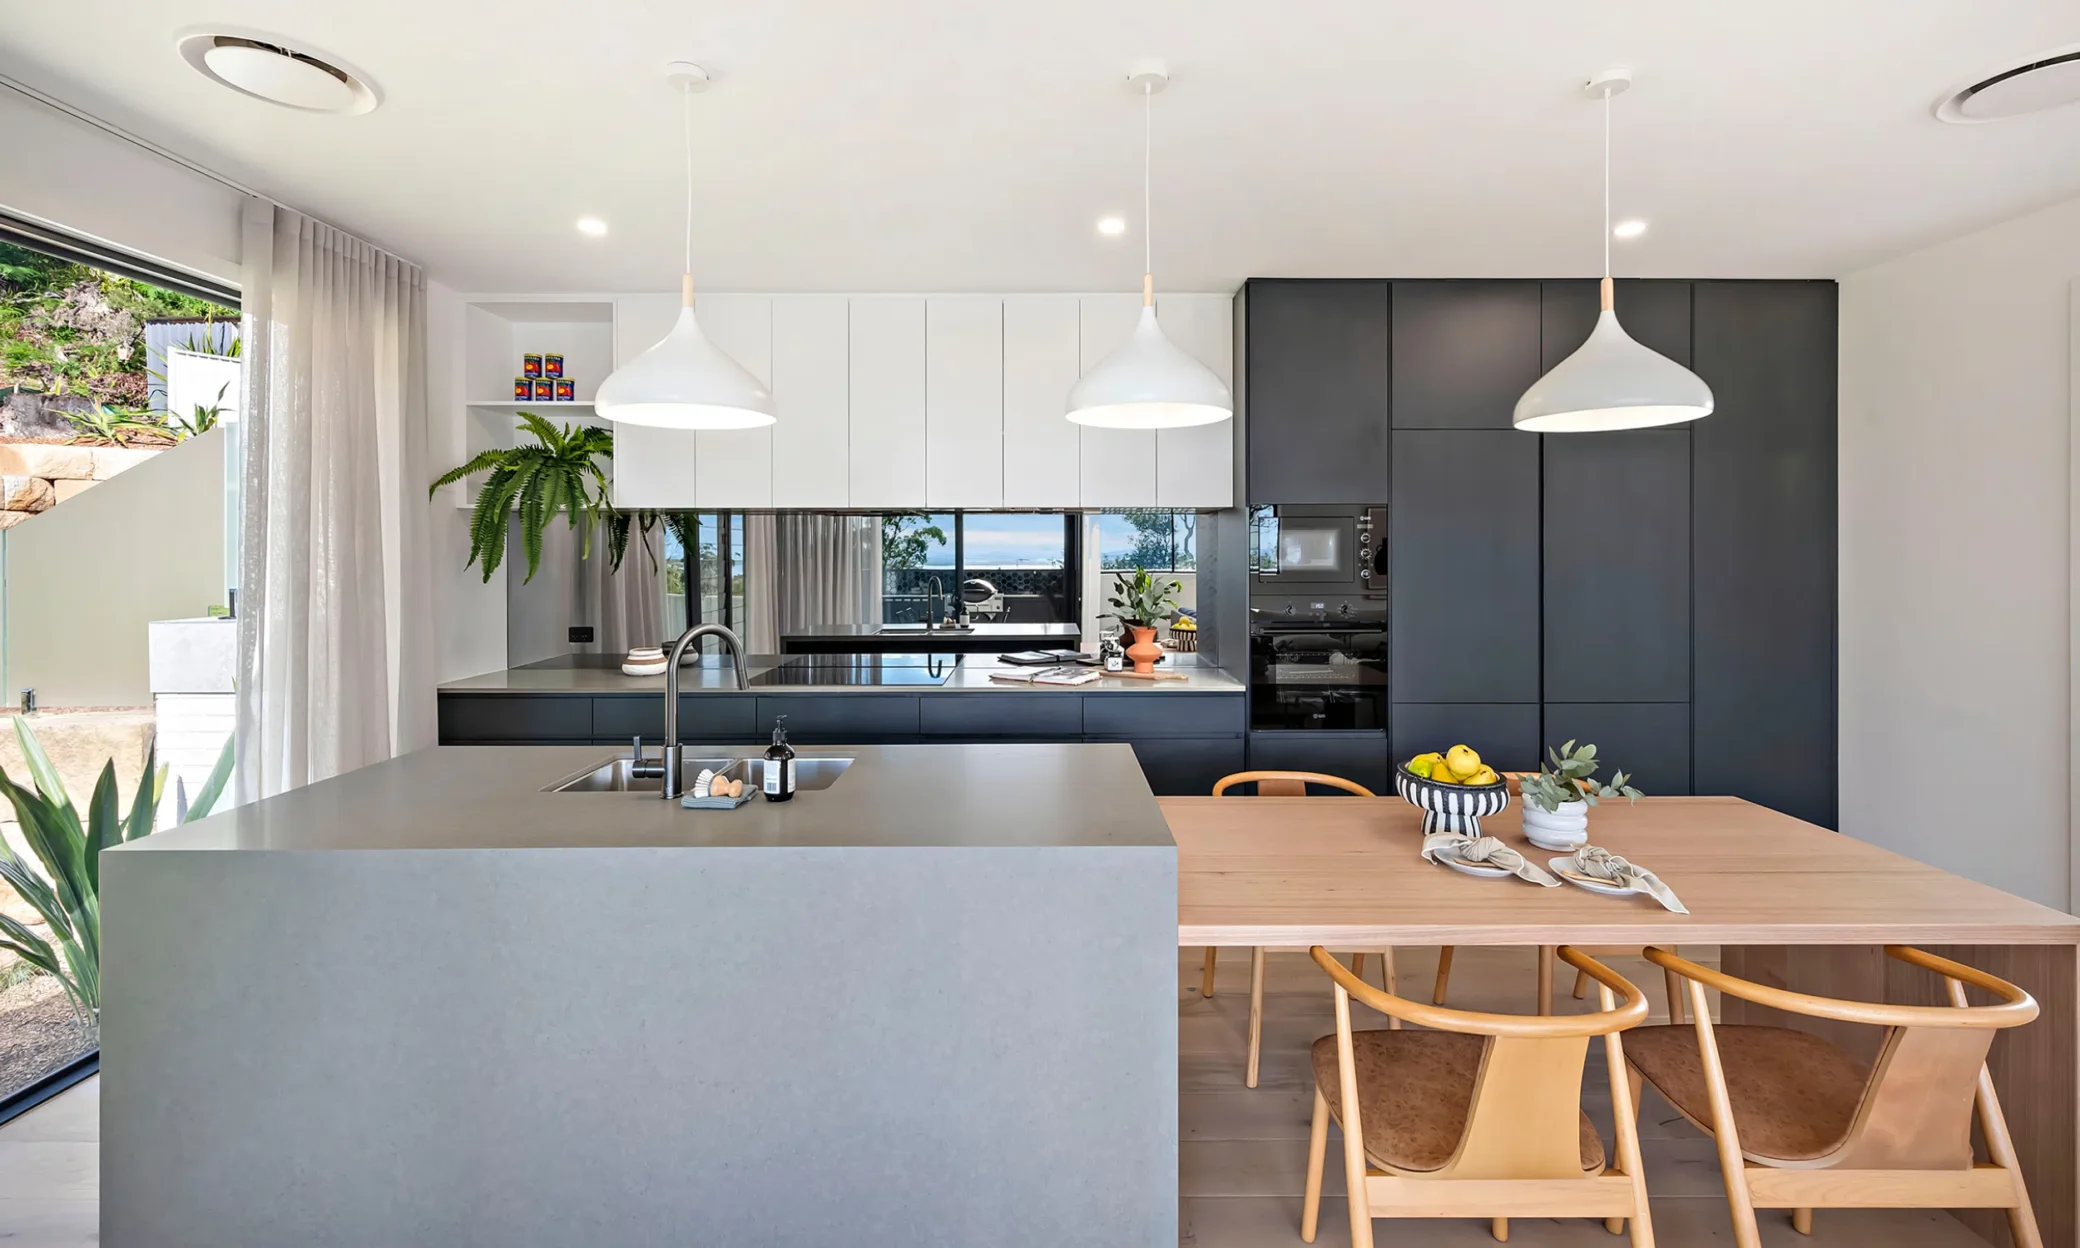 Modern kitchen with a central grey island, wooden dining table, and sleek black cabinets. White pendant lights hang above, with a view of greenery outside through large windows. Bright and airy ambiance, featuring